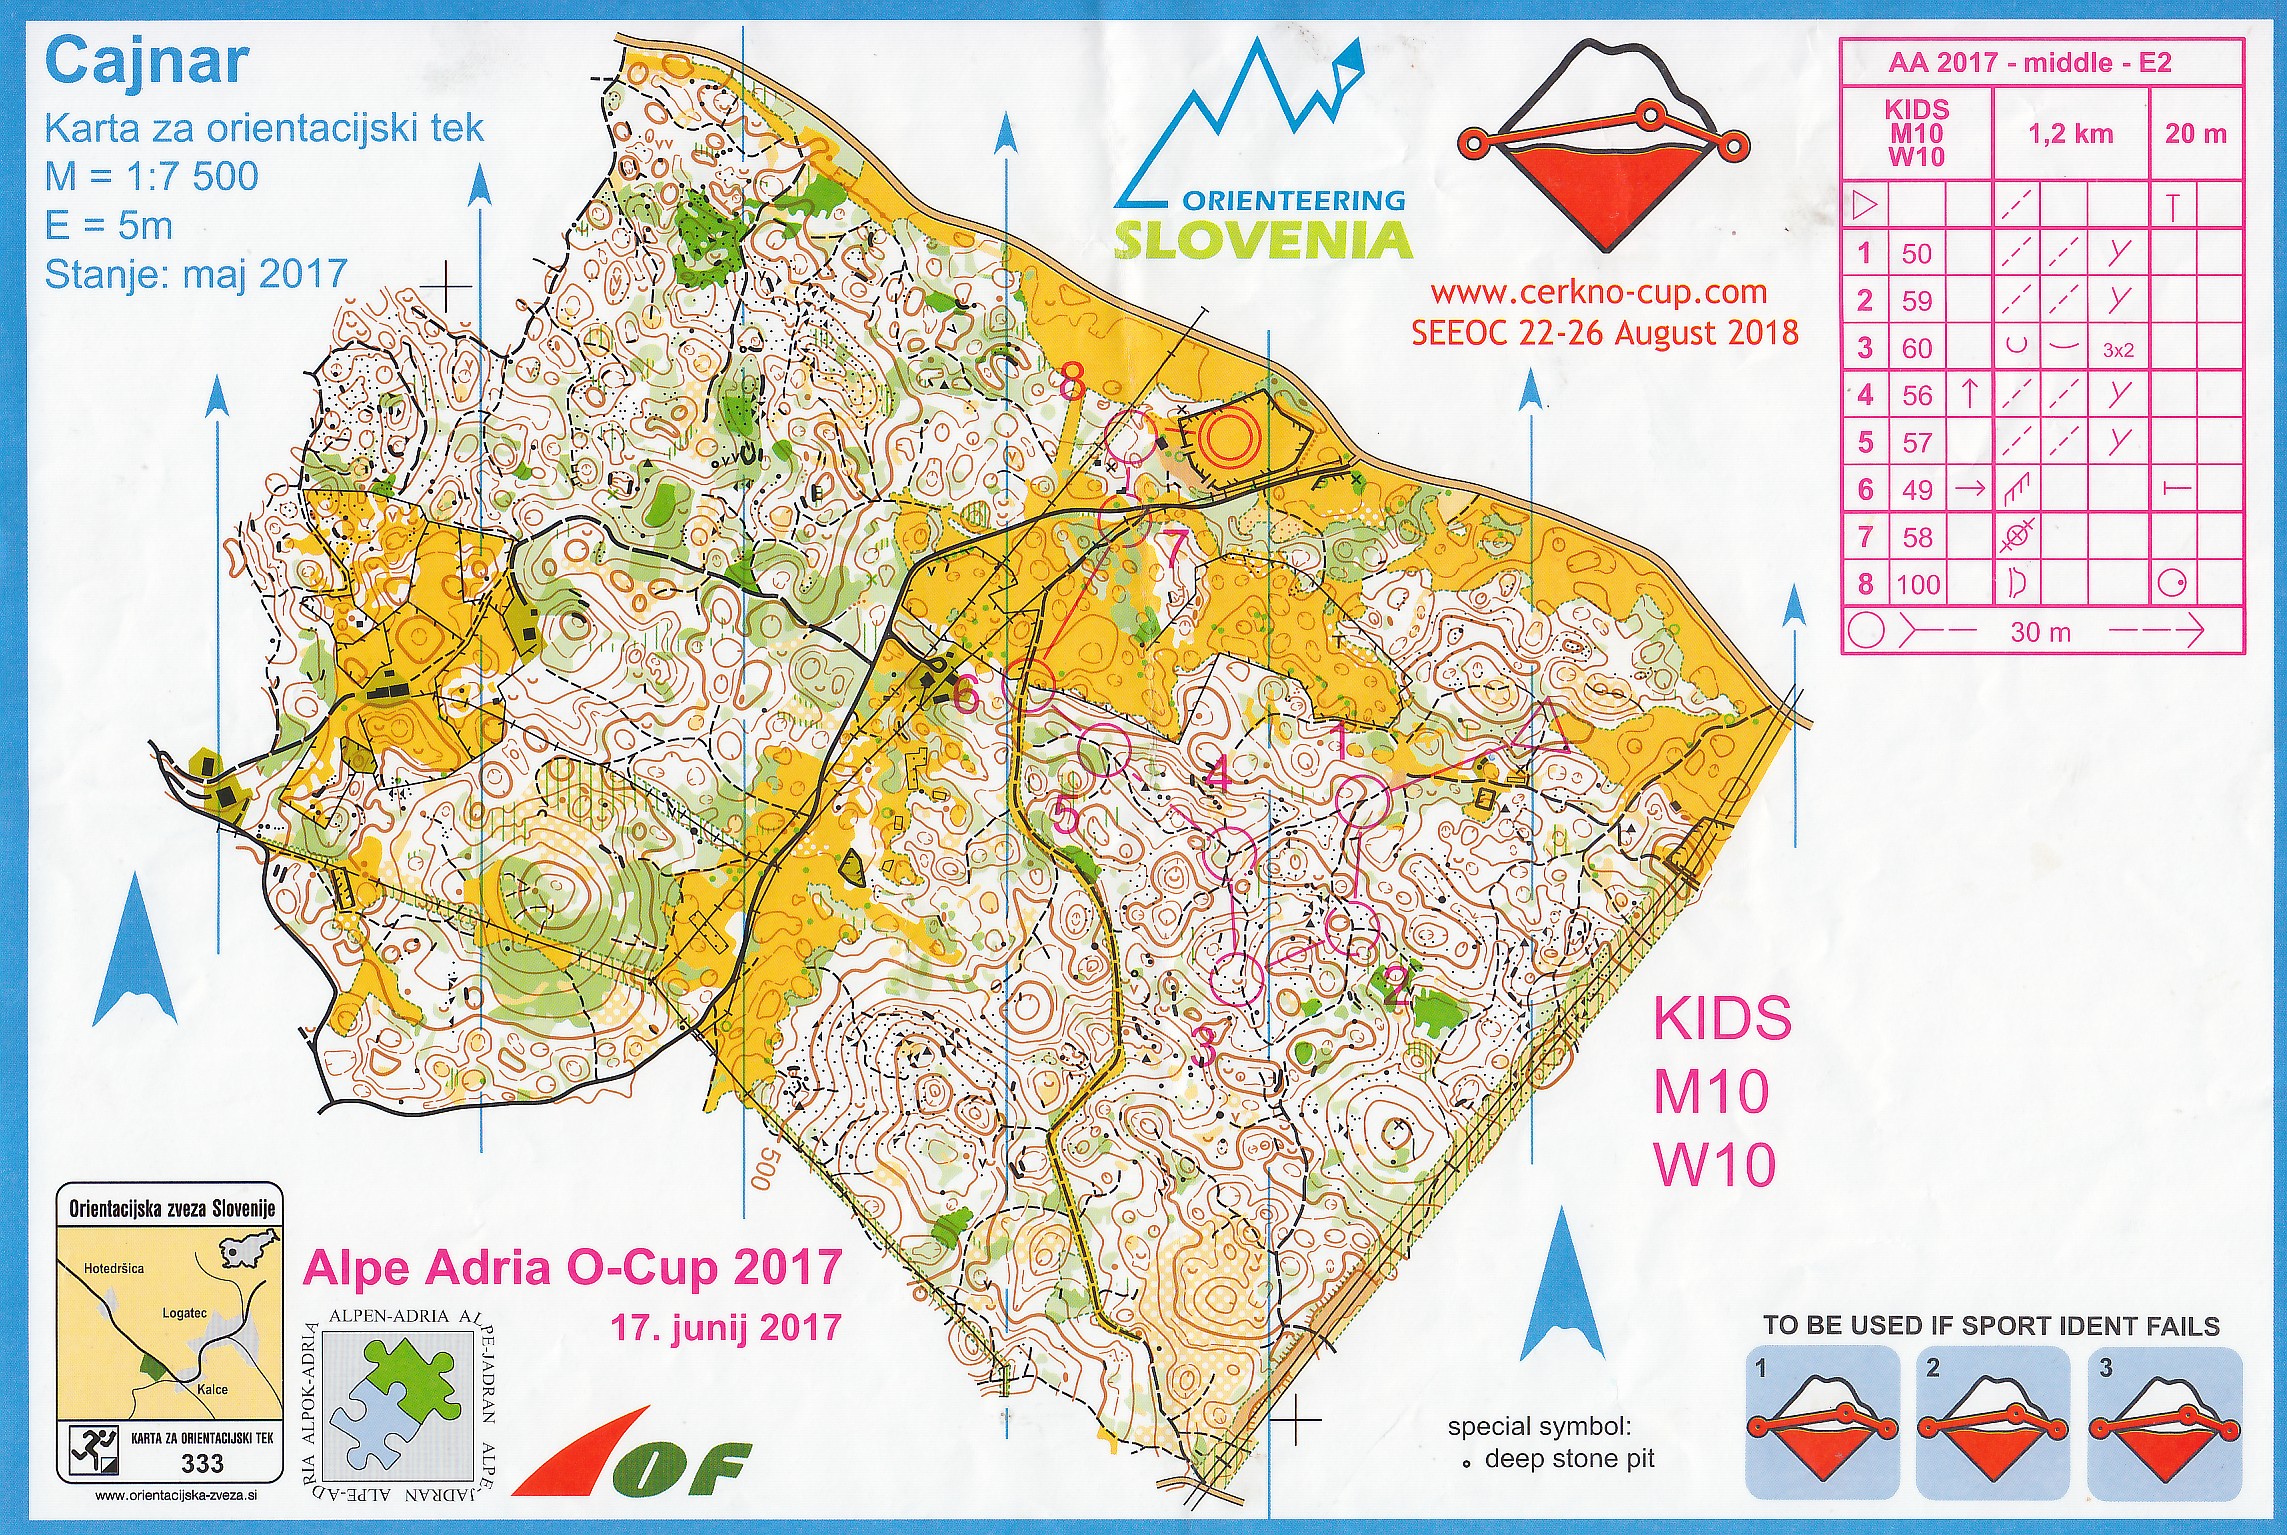 Alpe Adria Orienteering Cup 2017 - Middle (17/06/2017)